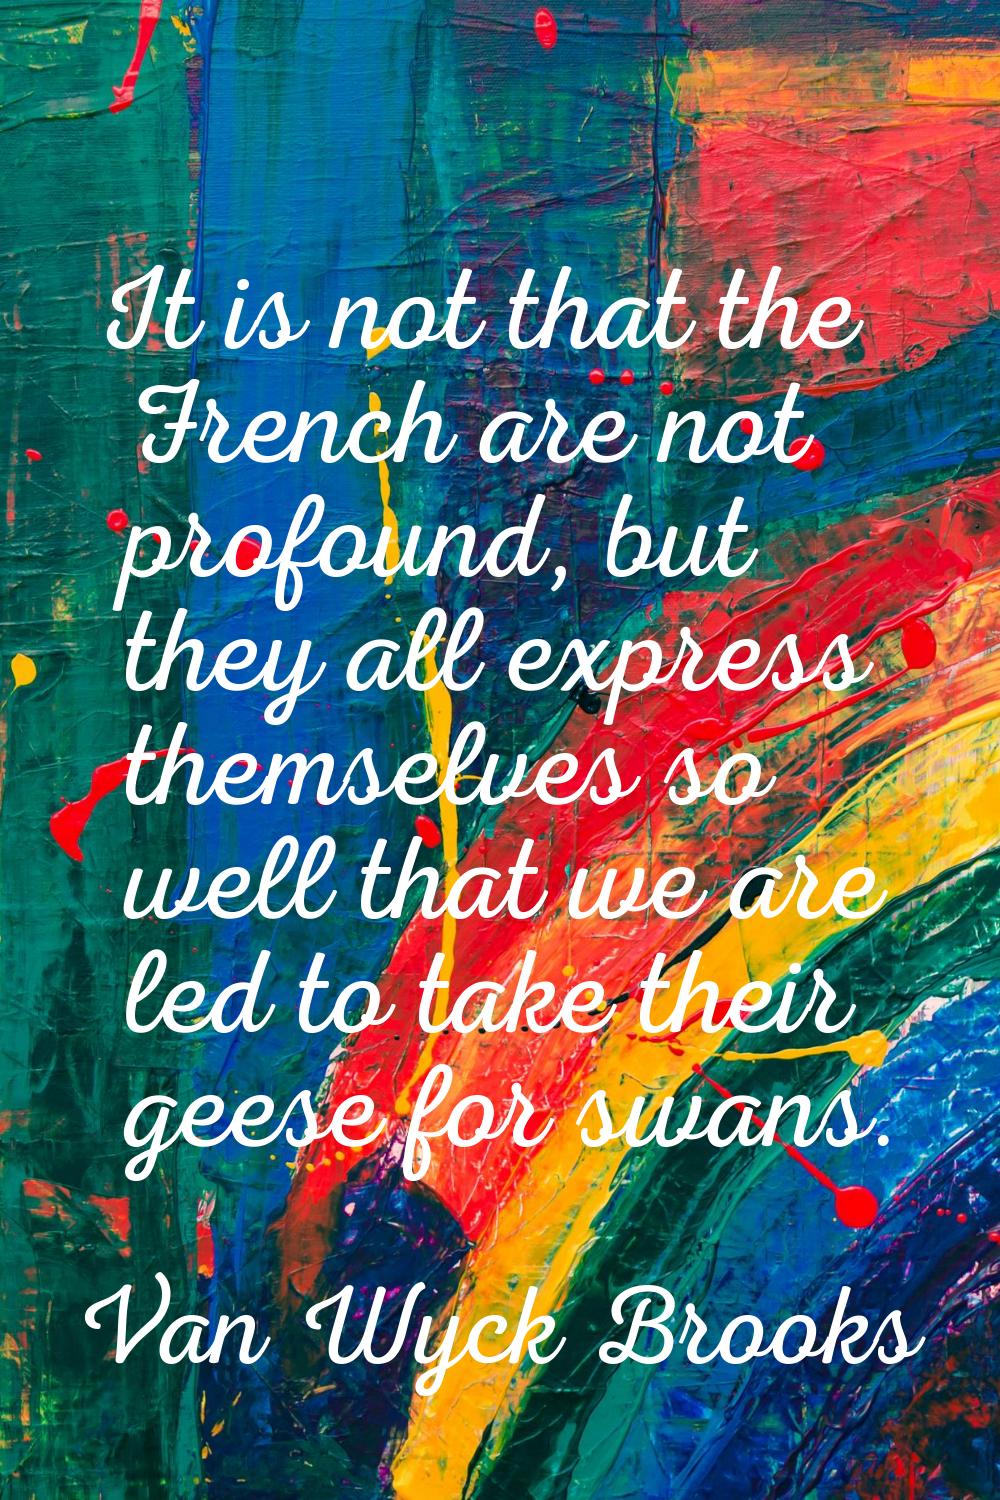 It is not that the French are not profound, but they all express themselves so well that we are led